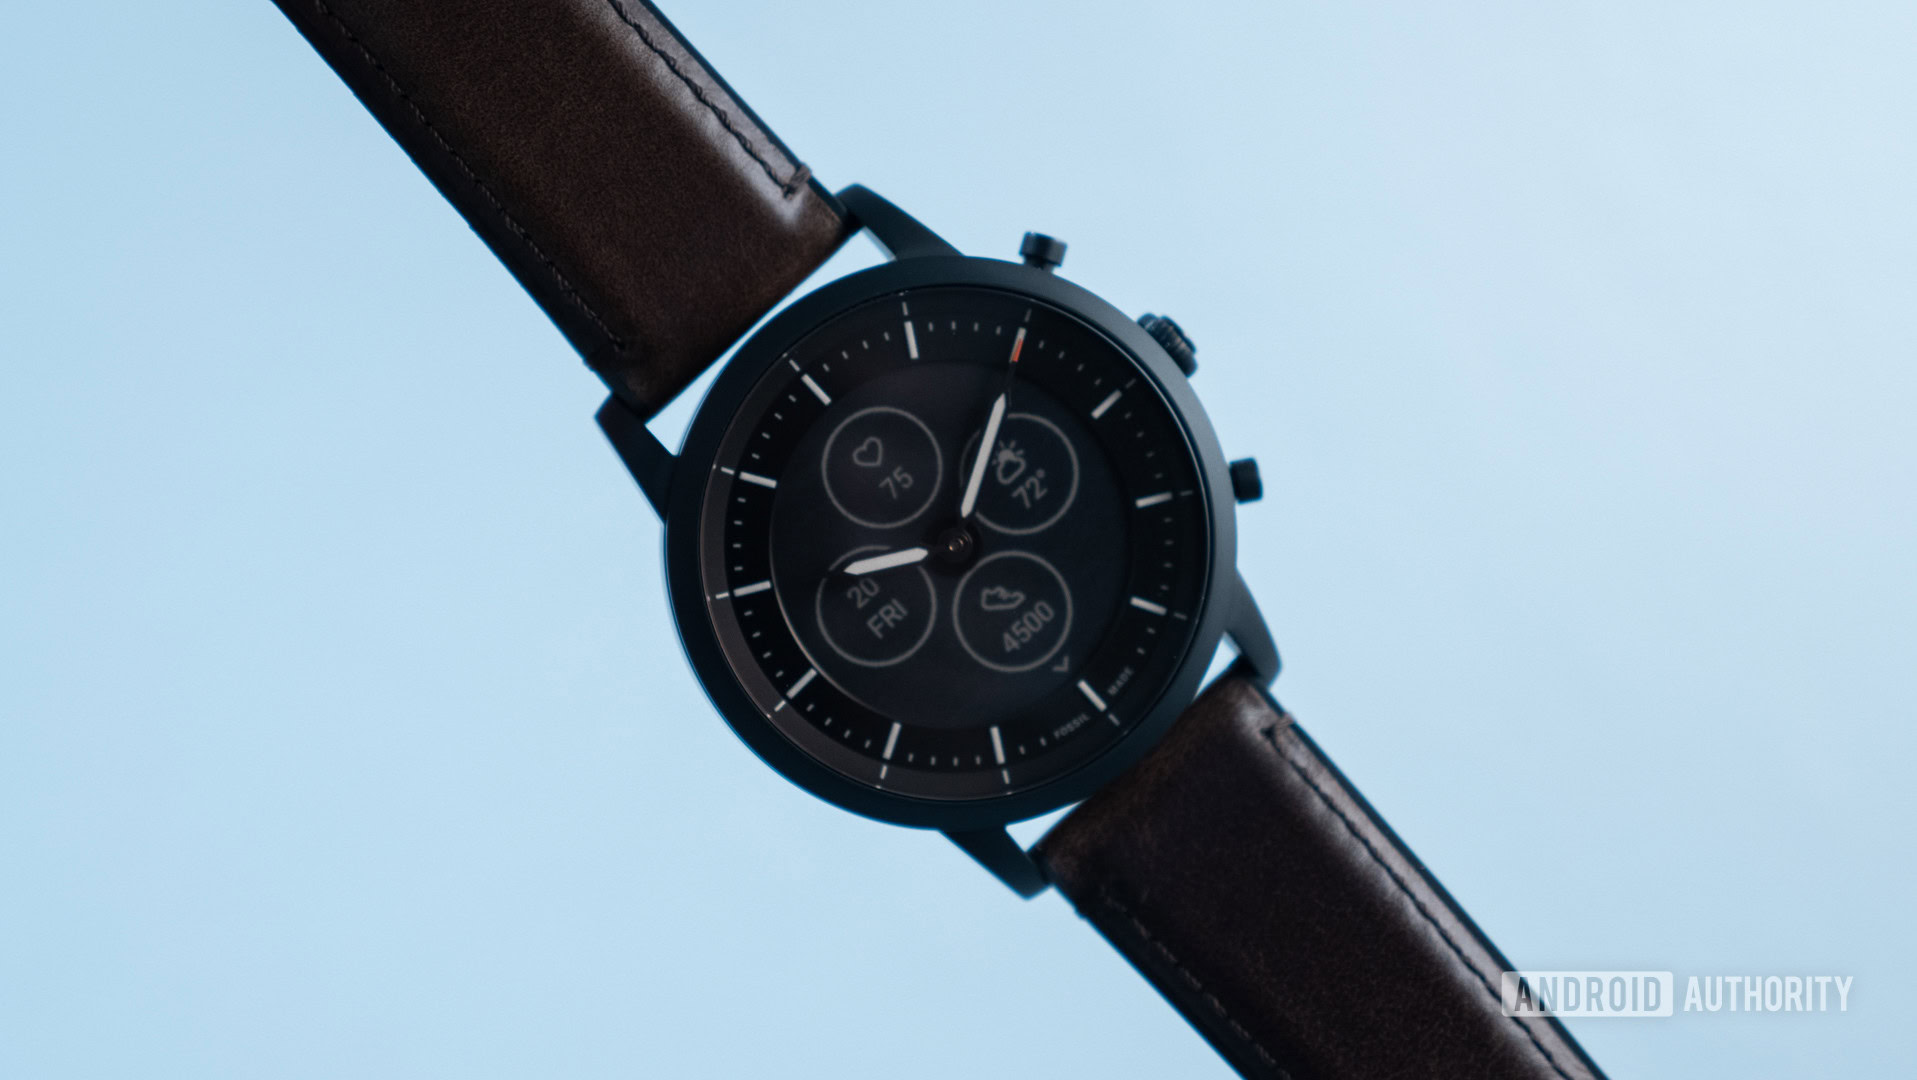 Fossil HR hands-on: Always-on display, battery